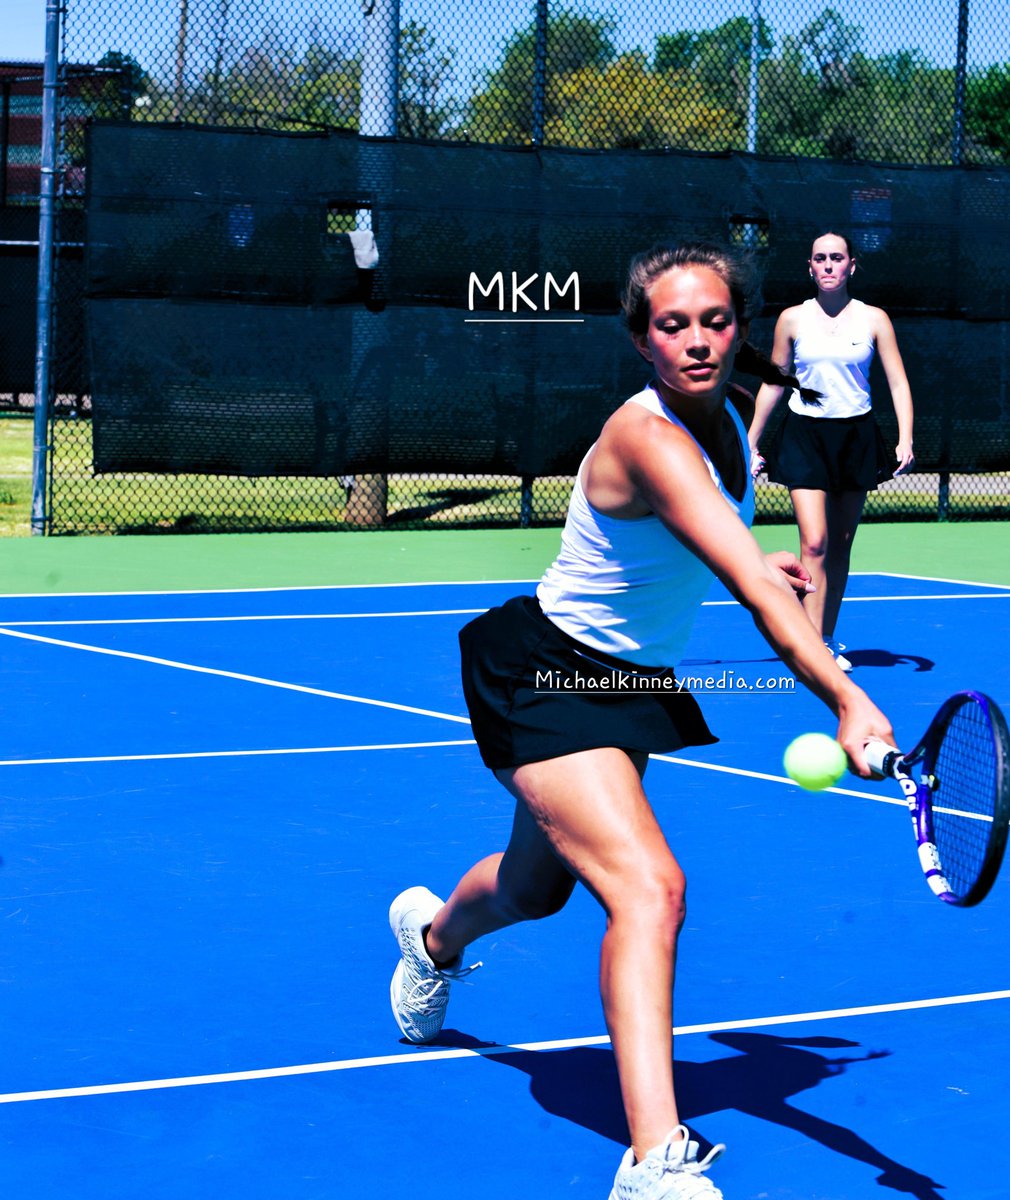 Got out on the courts this weekend to shoot some tennis. While my Yannick Noah days are behind me, I still enjoy covering it at times. (Michaelkinneymedia.com)